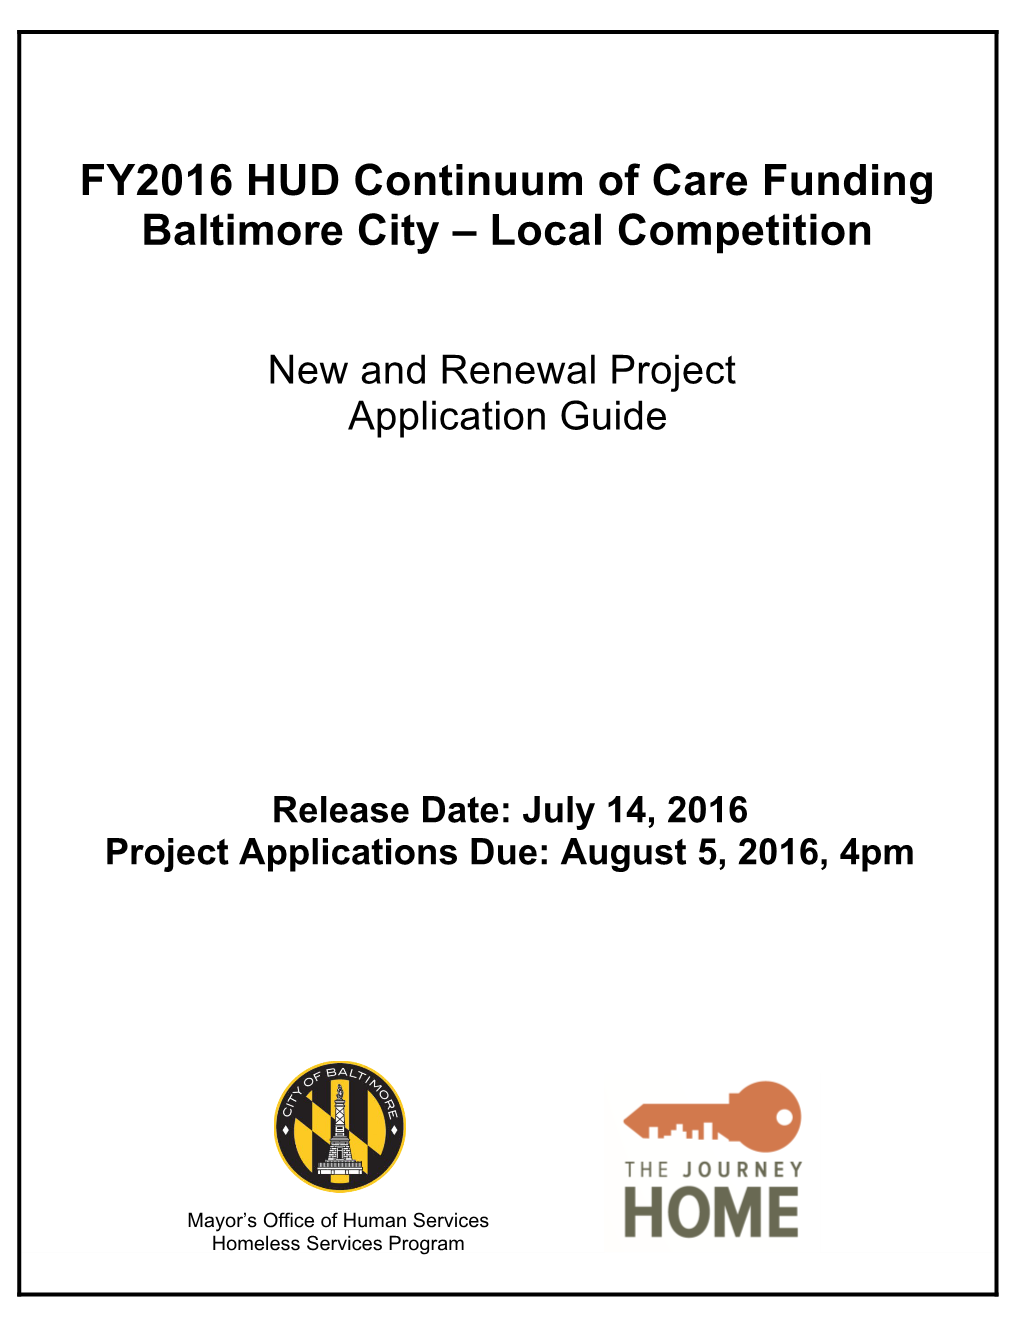 FY2016 Coc NOFA - Project Application Guide